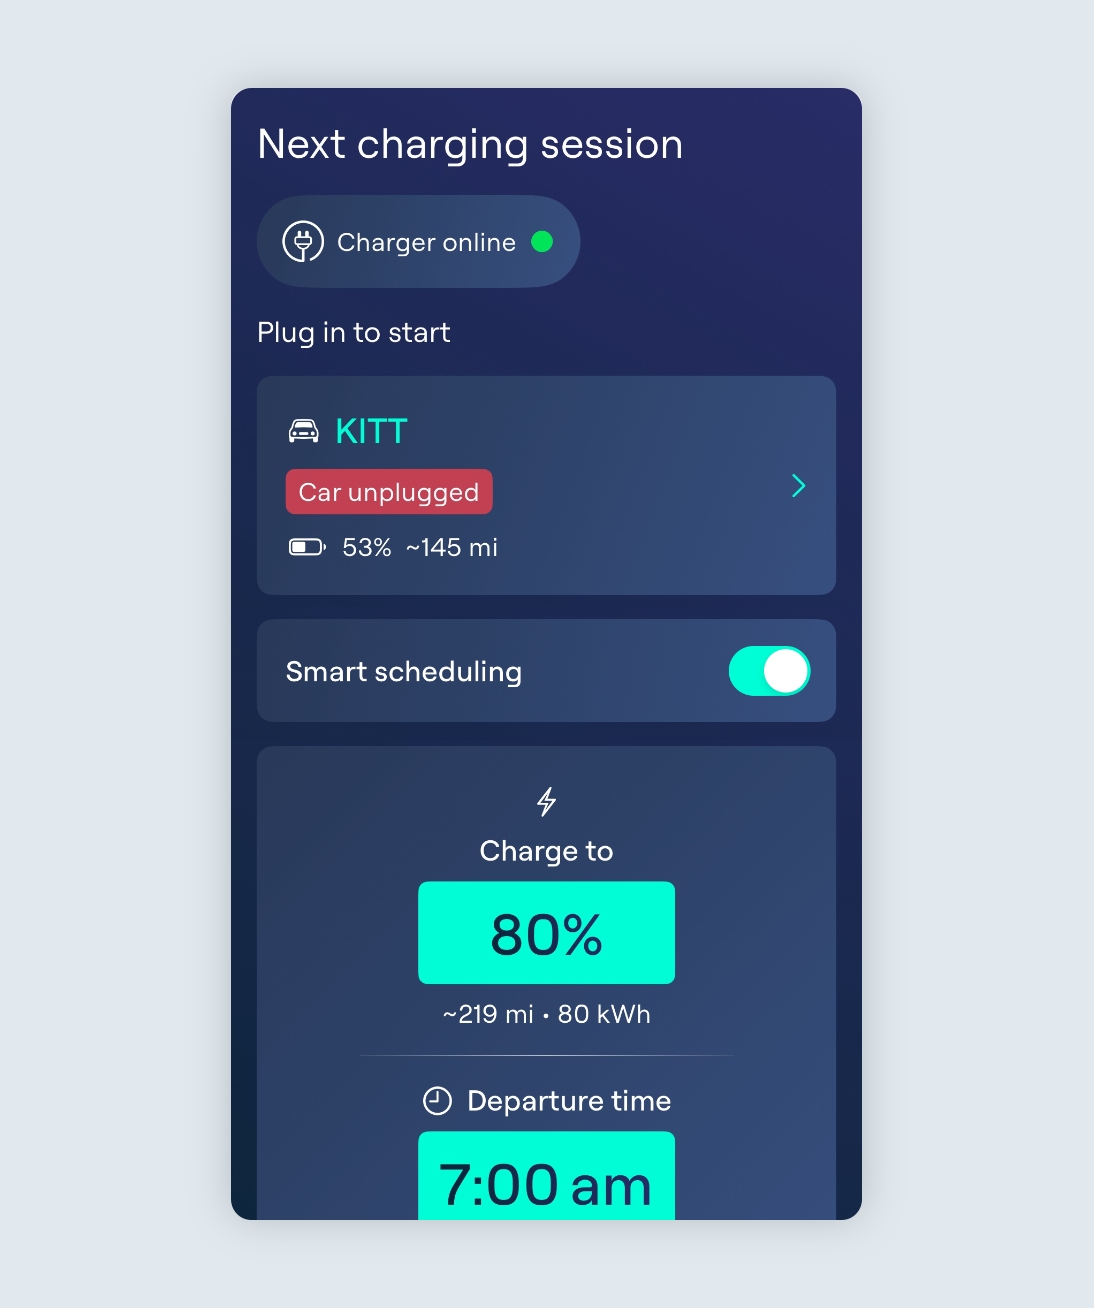 Charging page showing a Charge to amount of 80%